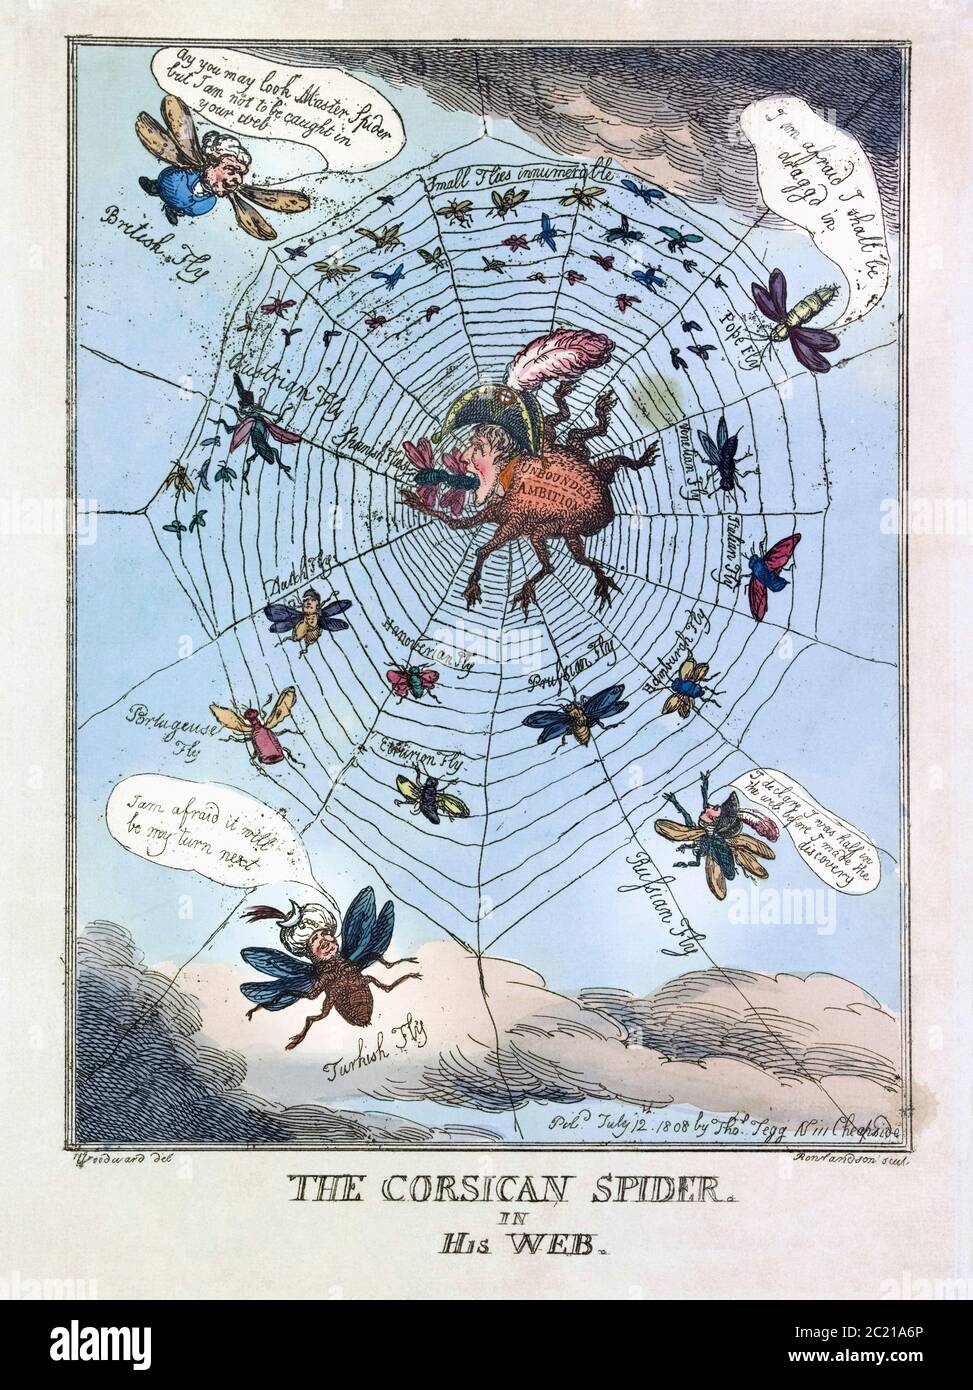 The Corsican Spider in His Web.  Political cartoon dated July 12, 1808, showing Napoleon as a spider devouring European countries trapped in his web.  From an etching by Thomas Rowlandson after a work by George Moutard Woodward. Stock Photo